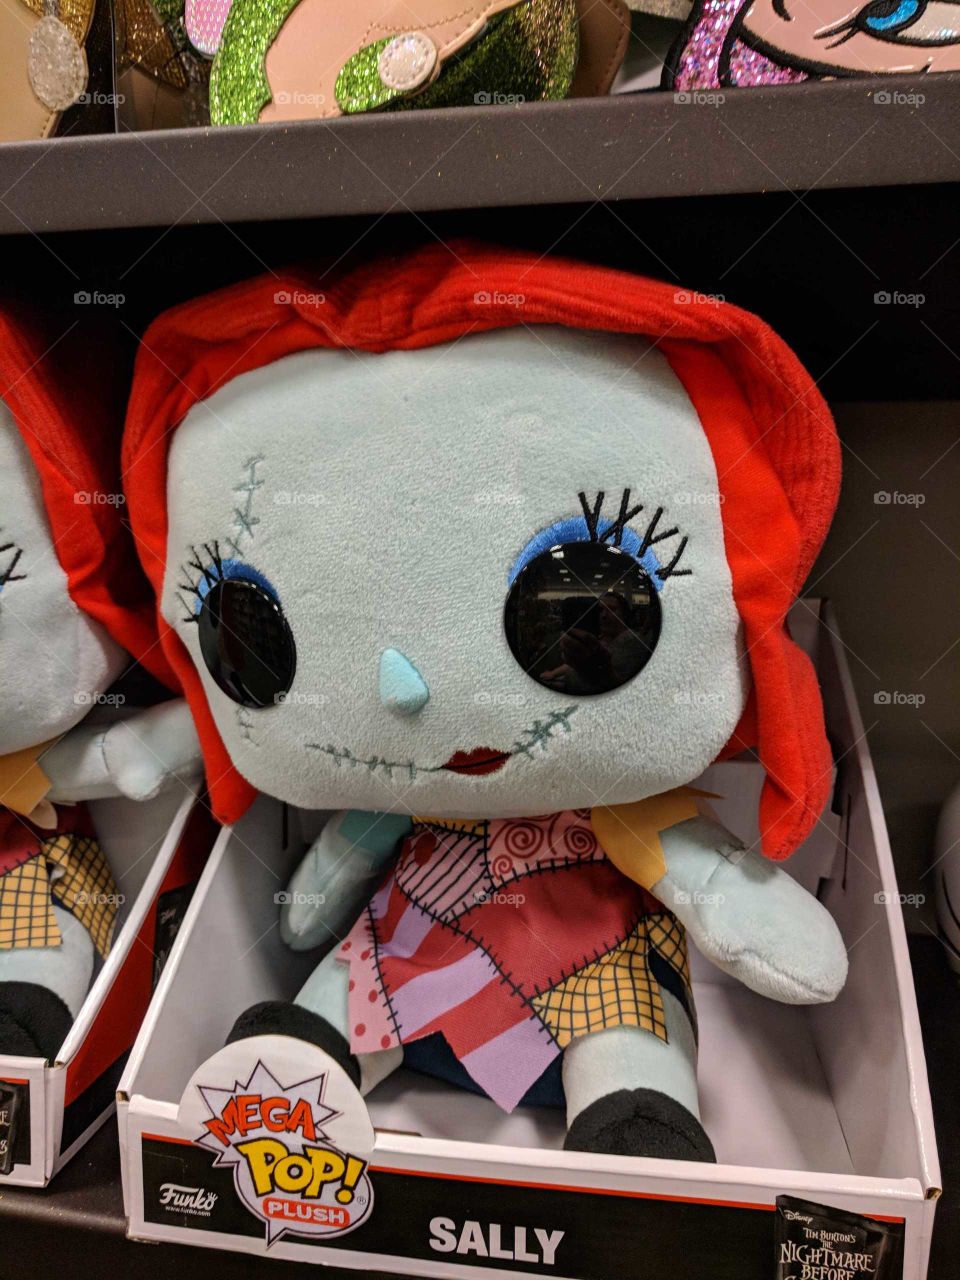 Sally doll at a Barnes and Noble. It would be nice to have someone that needed a doll...